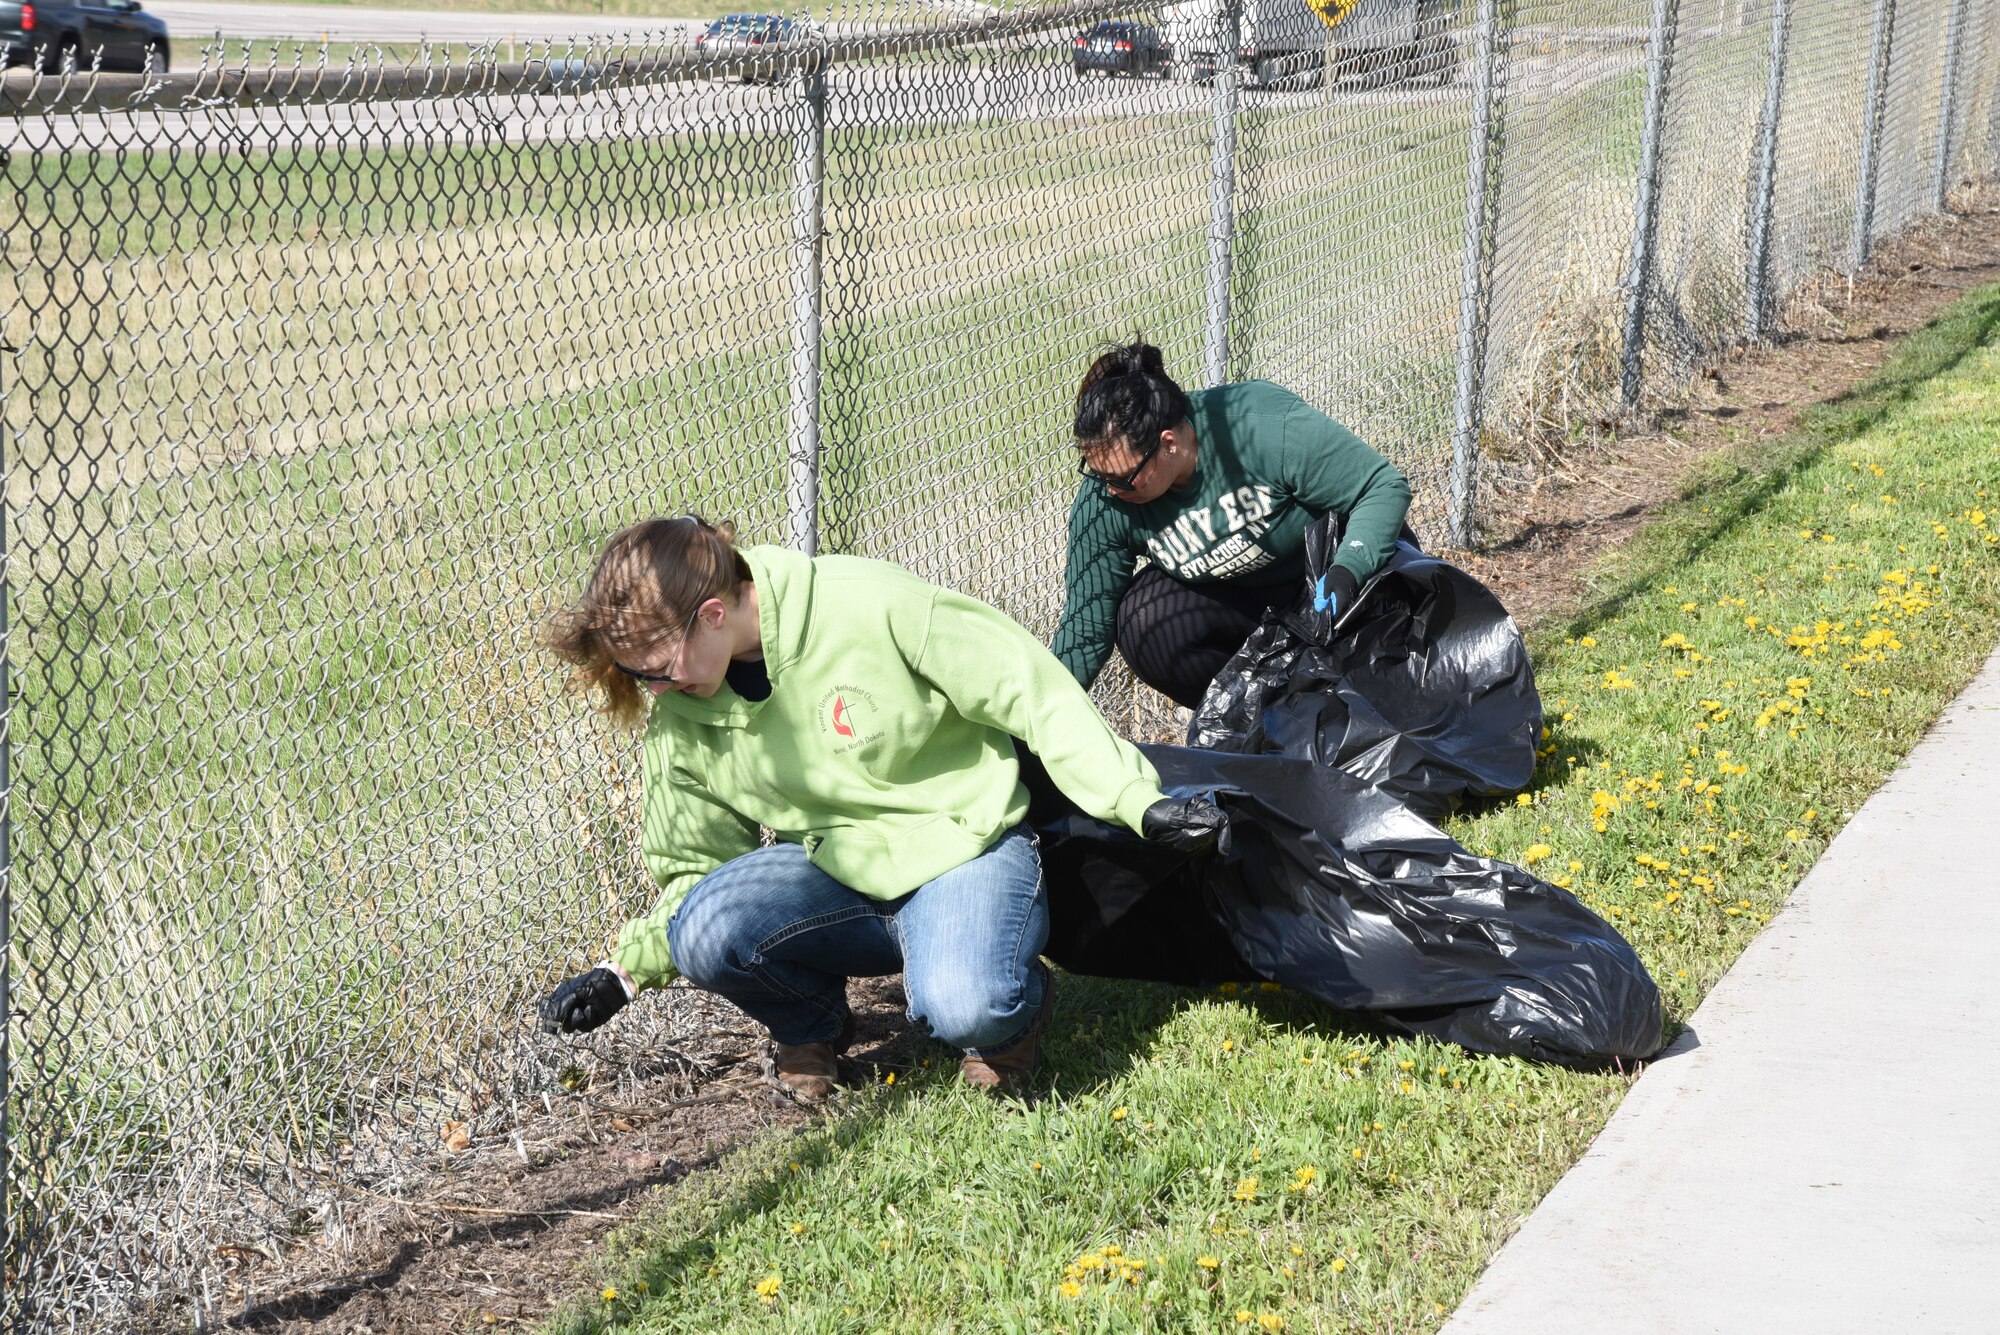 Cpl. Sierra Tryon of the Wyoming National Guard and member of Laramie County Community College's Student Veteran Association and Nicole Ng, Air and Water Program Manager for the 90th Missile Wing, clean a section of fence along the Cheyenne Greenway in Cheyenne, Wyo., May 11. More than fifty volunteers came out as part of the Crow Creek Revival project aimed at bringing the creek closer to its original state.